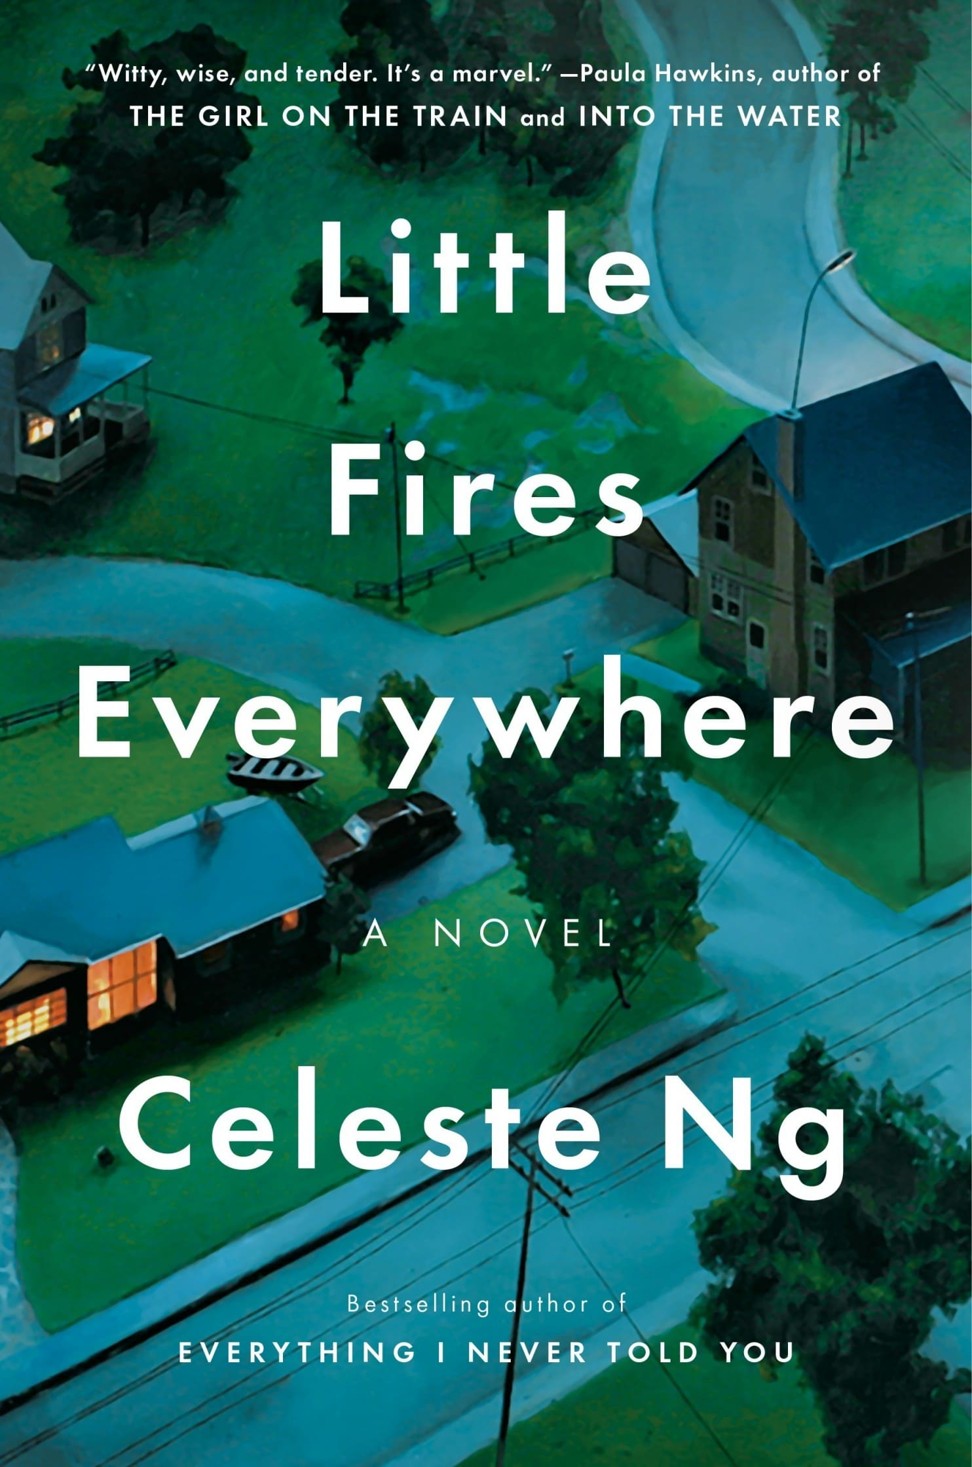 Little Fires Everywhere is about a white family based in the US that attempts to adopt a Chinese-American baby.